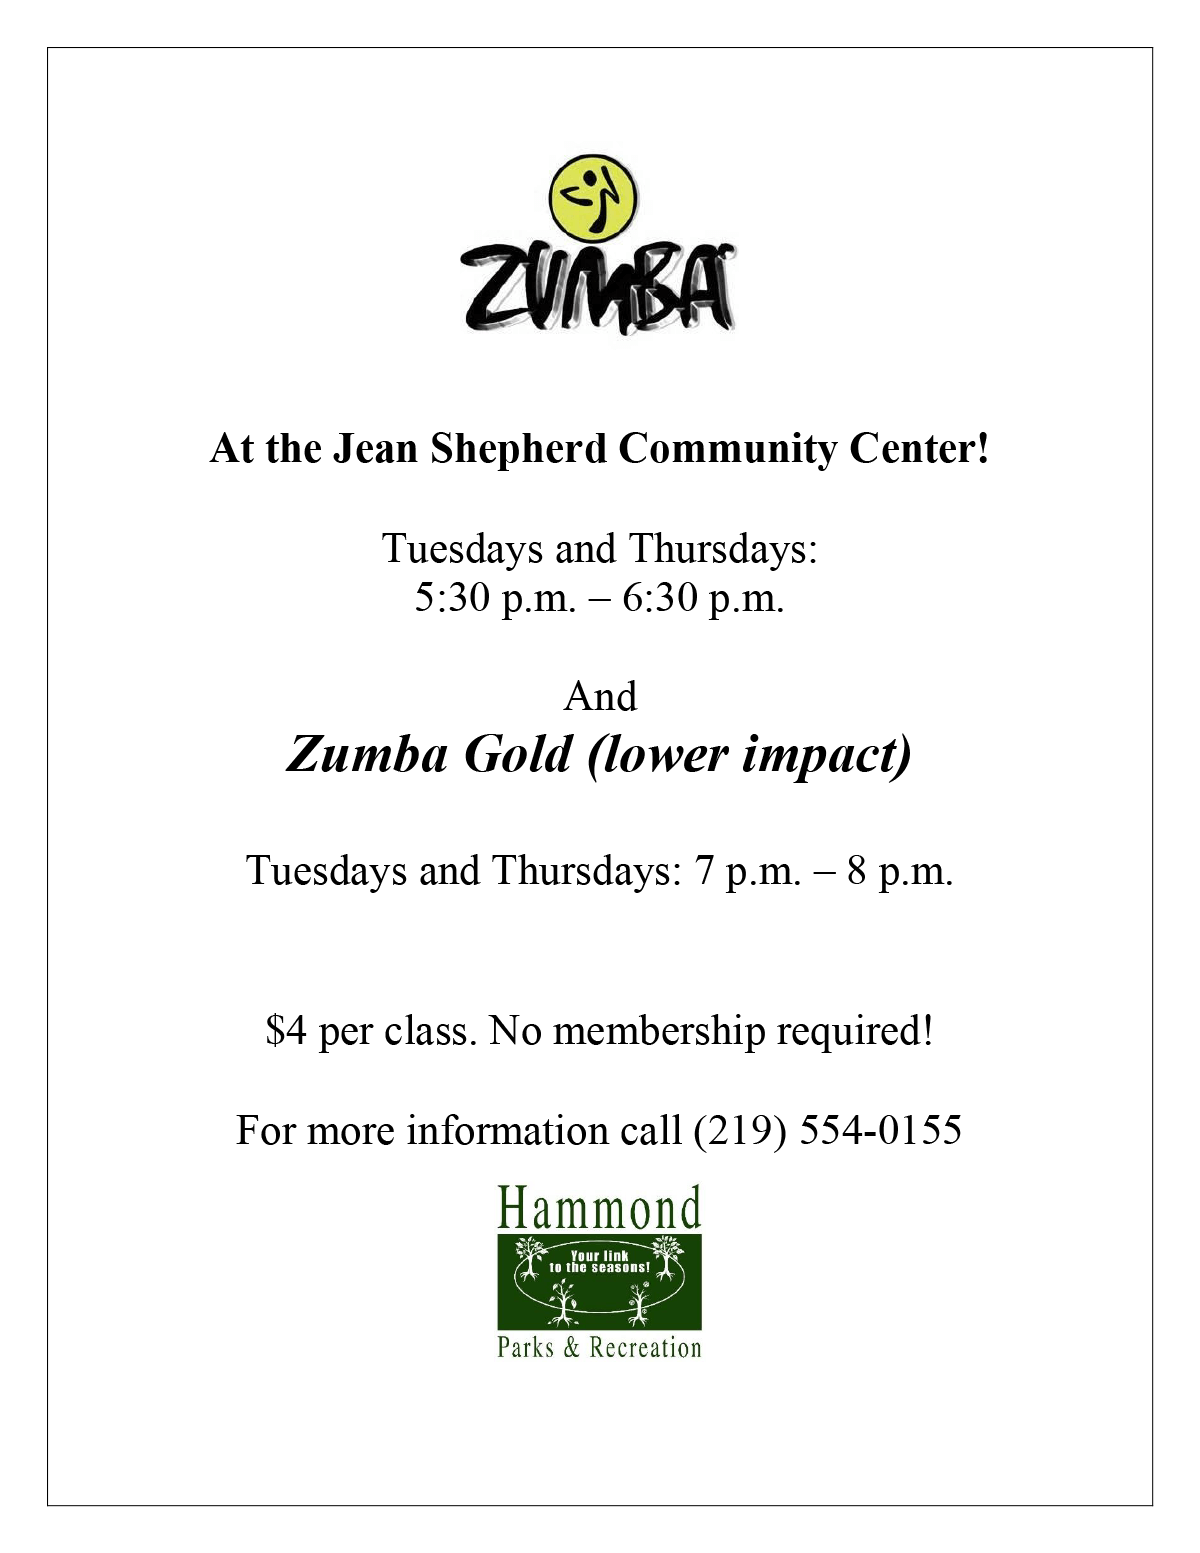 Zumba at the Jean Shepherd Community Center! Tuesdays & Thursdays, 5:30pm – 6:30pm. Also available: Zumba Gold (lower impact), Tuesdays & Thursdays: 7pm – 8pm. $4 per class. No membership required! For more information call (219) 554-0155.